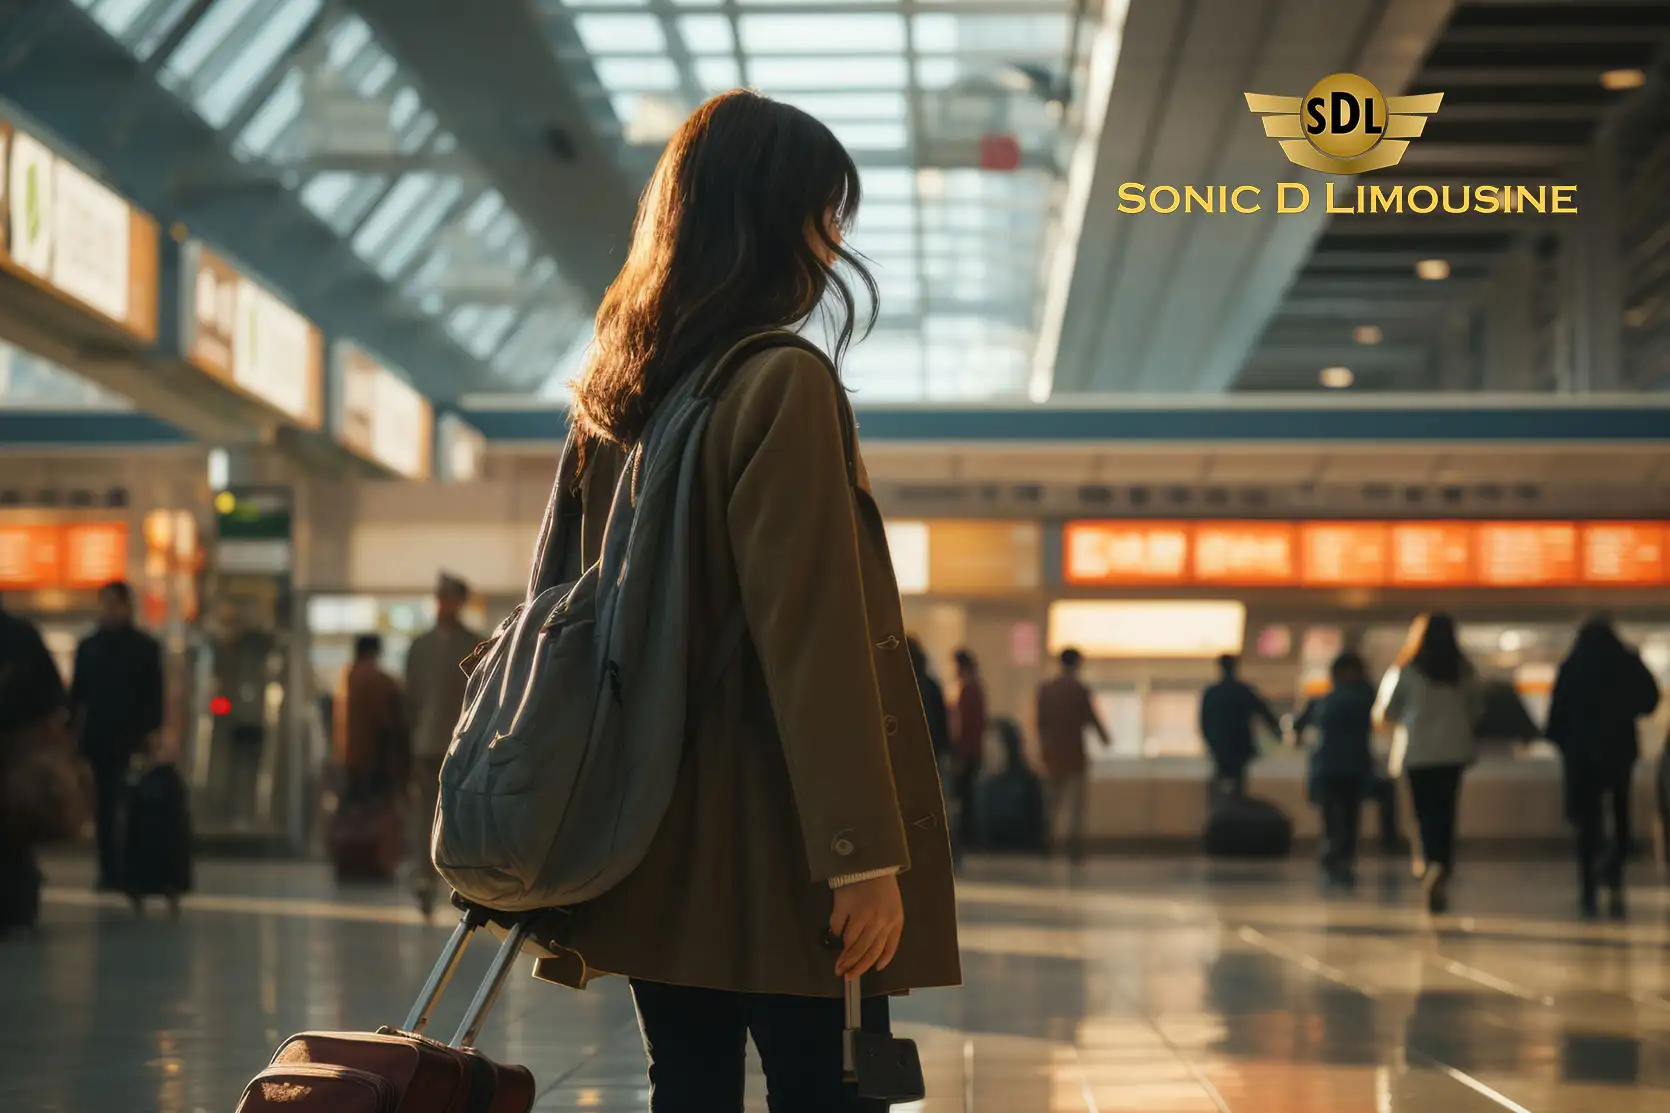 Sonic D Limousine A woman walking through an airport with her luggage.